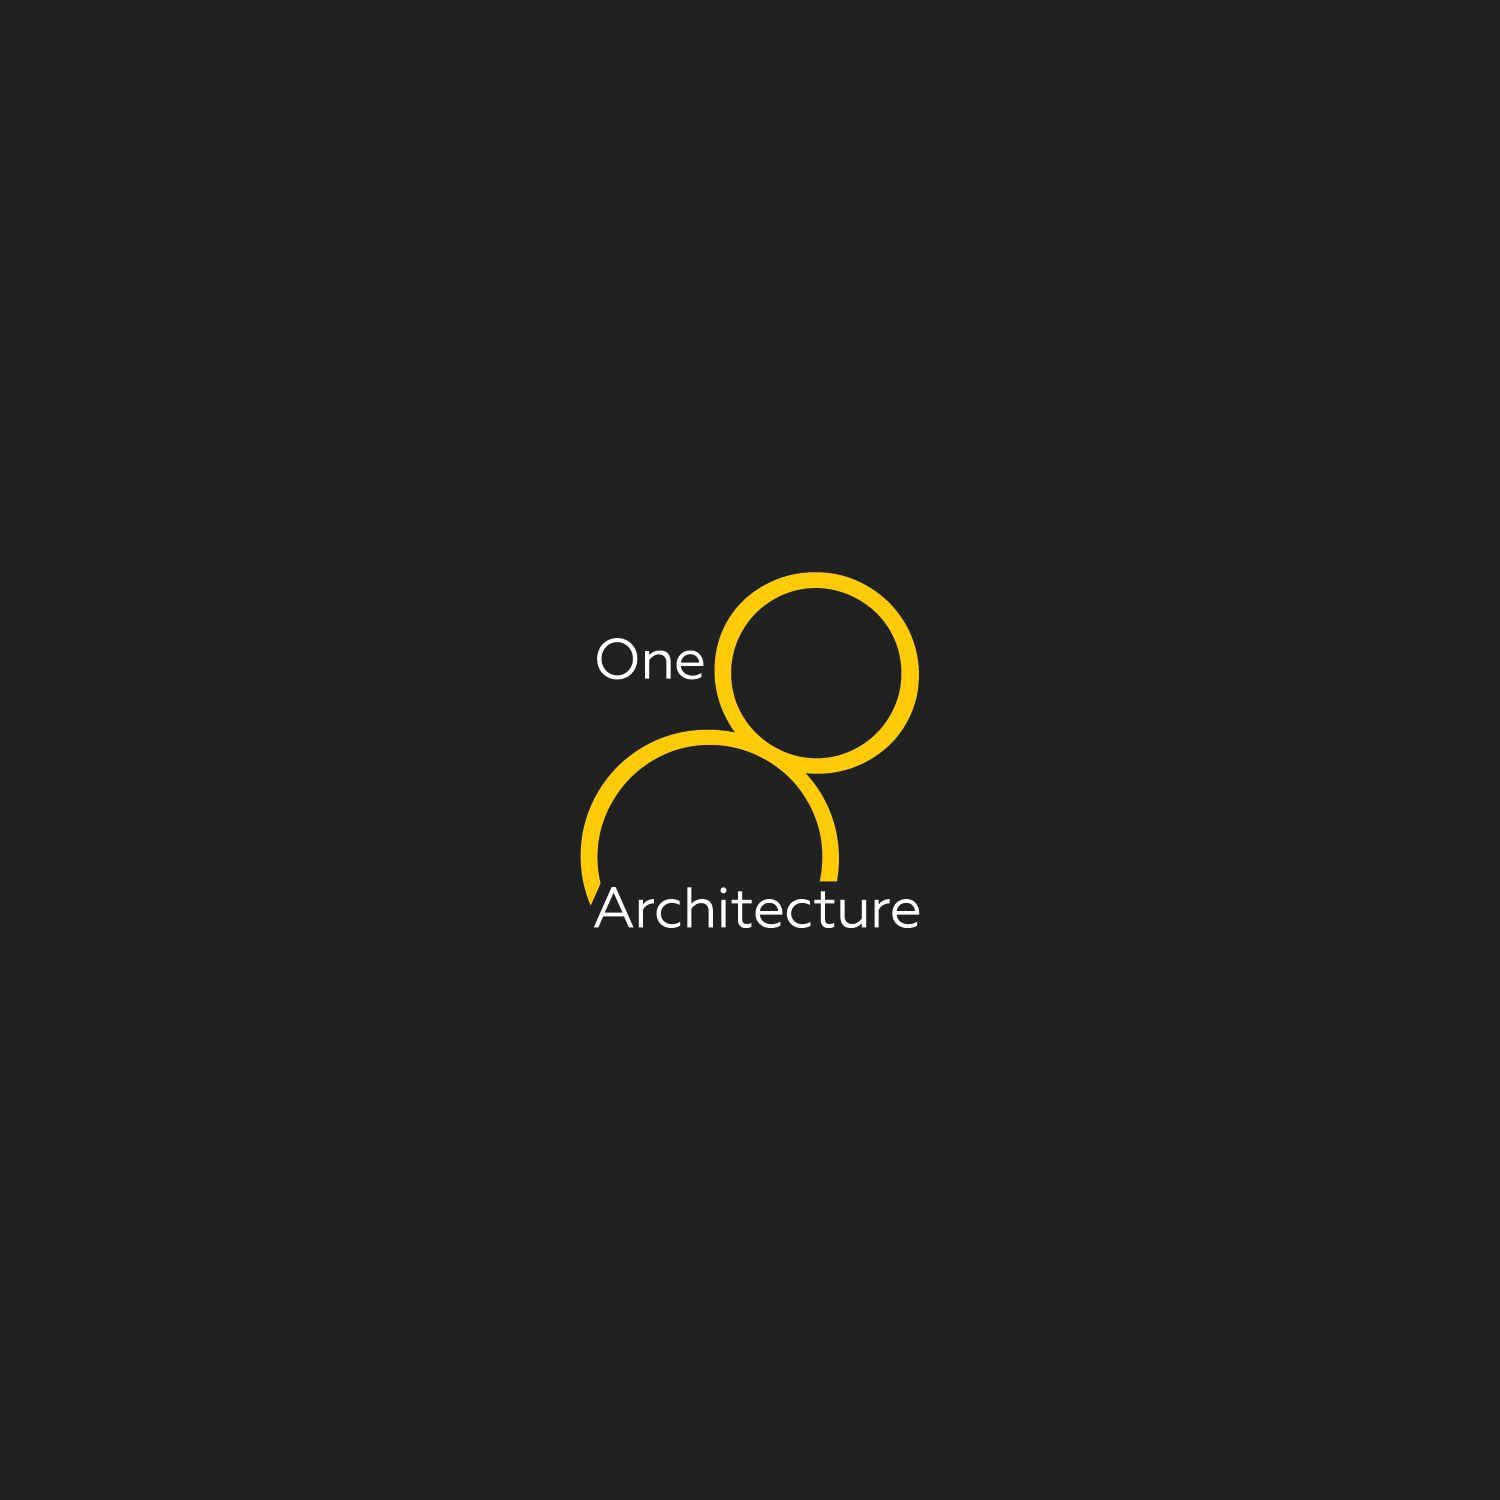 Eight Logo - Modern, Professional, Architecture Logo Design for Architecture One ...